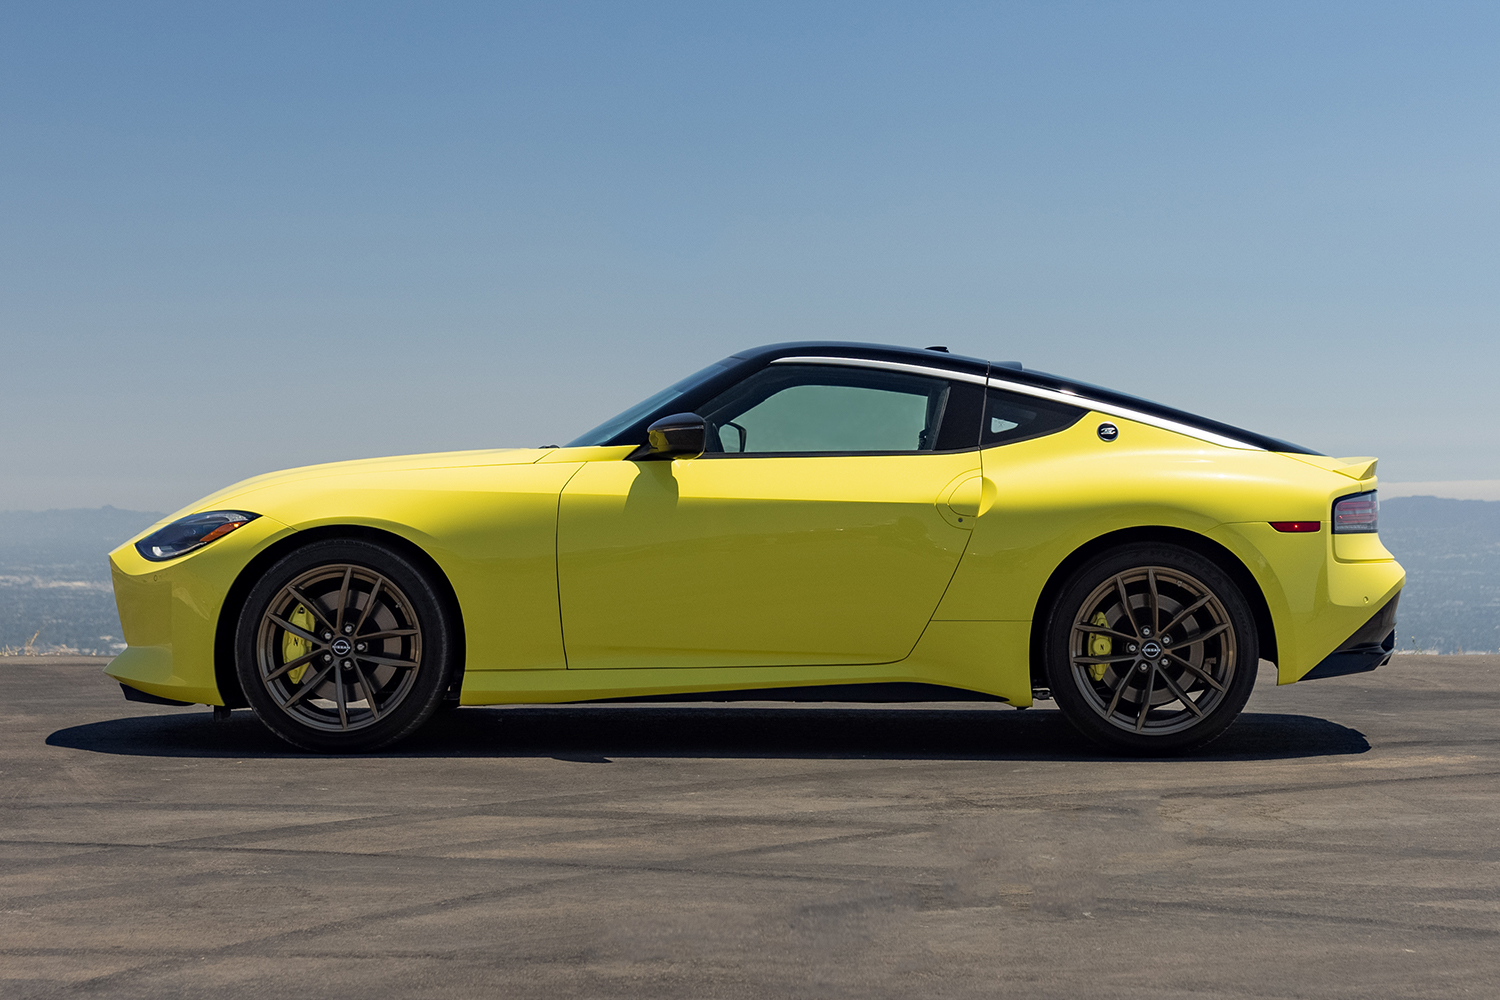 The new 2023 Nissan Z Proto Spec, a limited edition launch version of the new sports car. Here the coupe is feature in Ikazuchi Yellow.